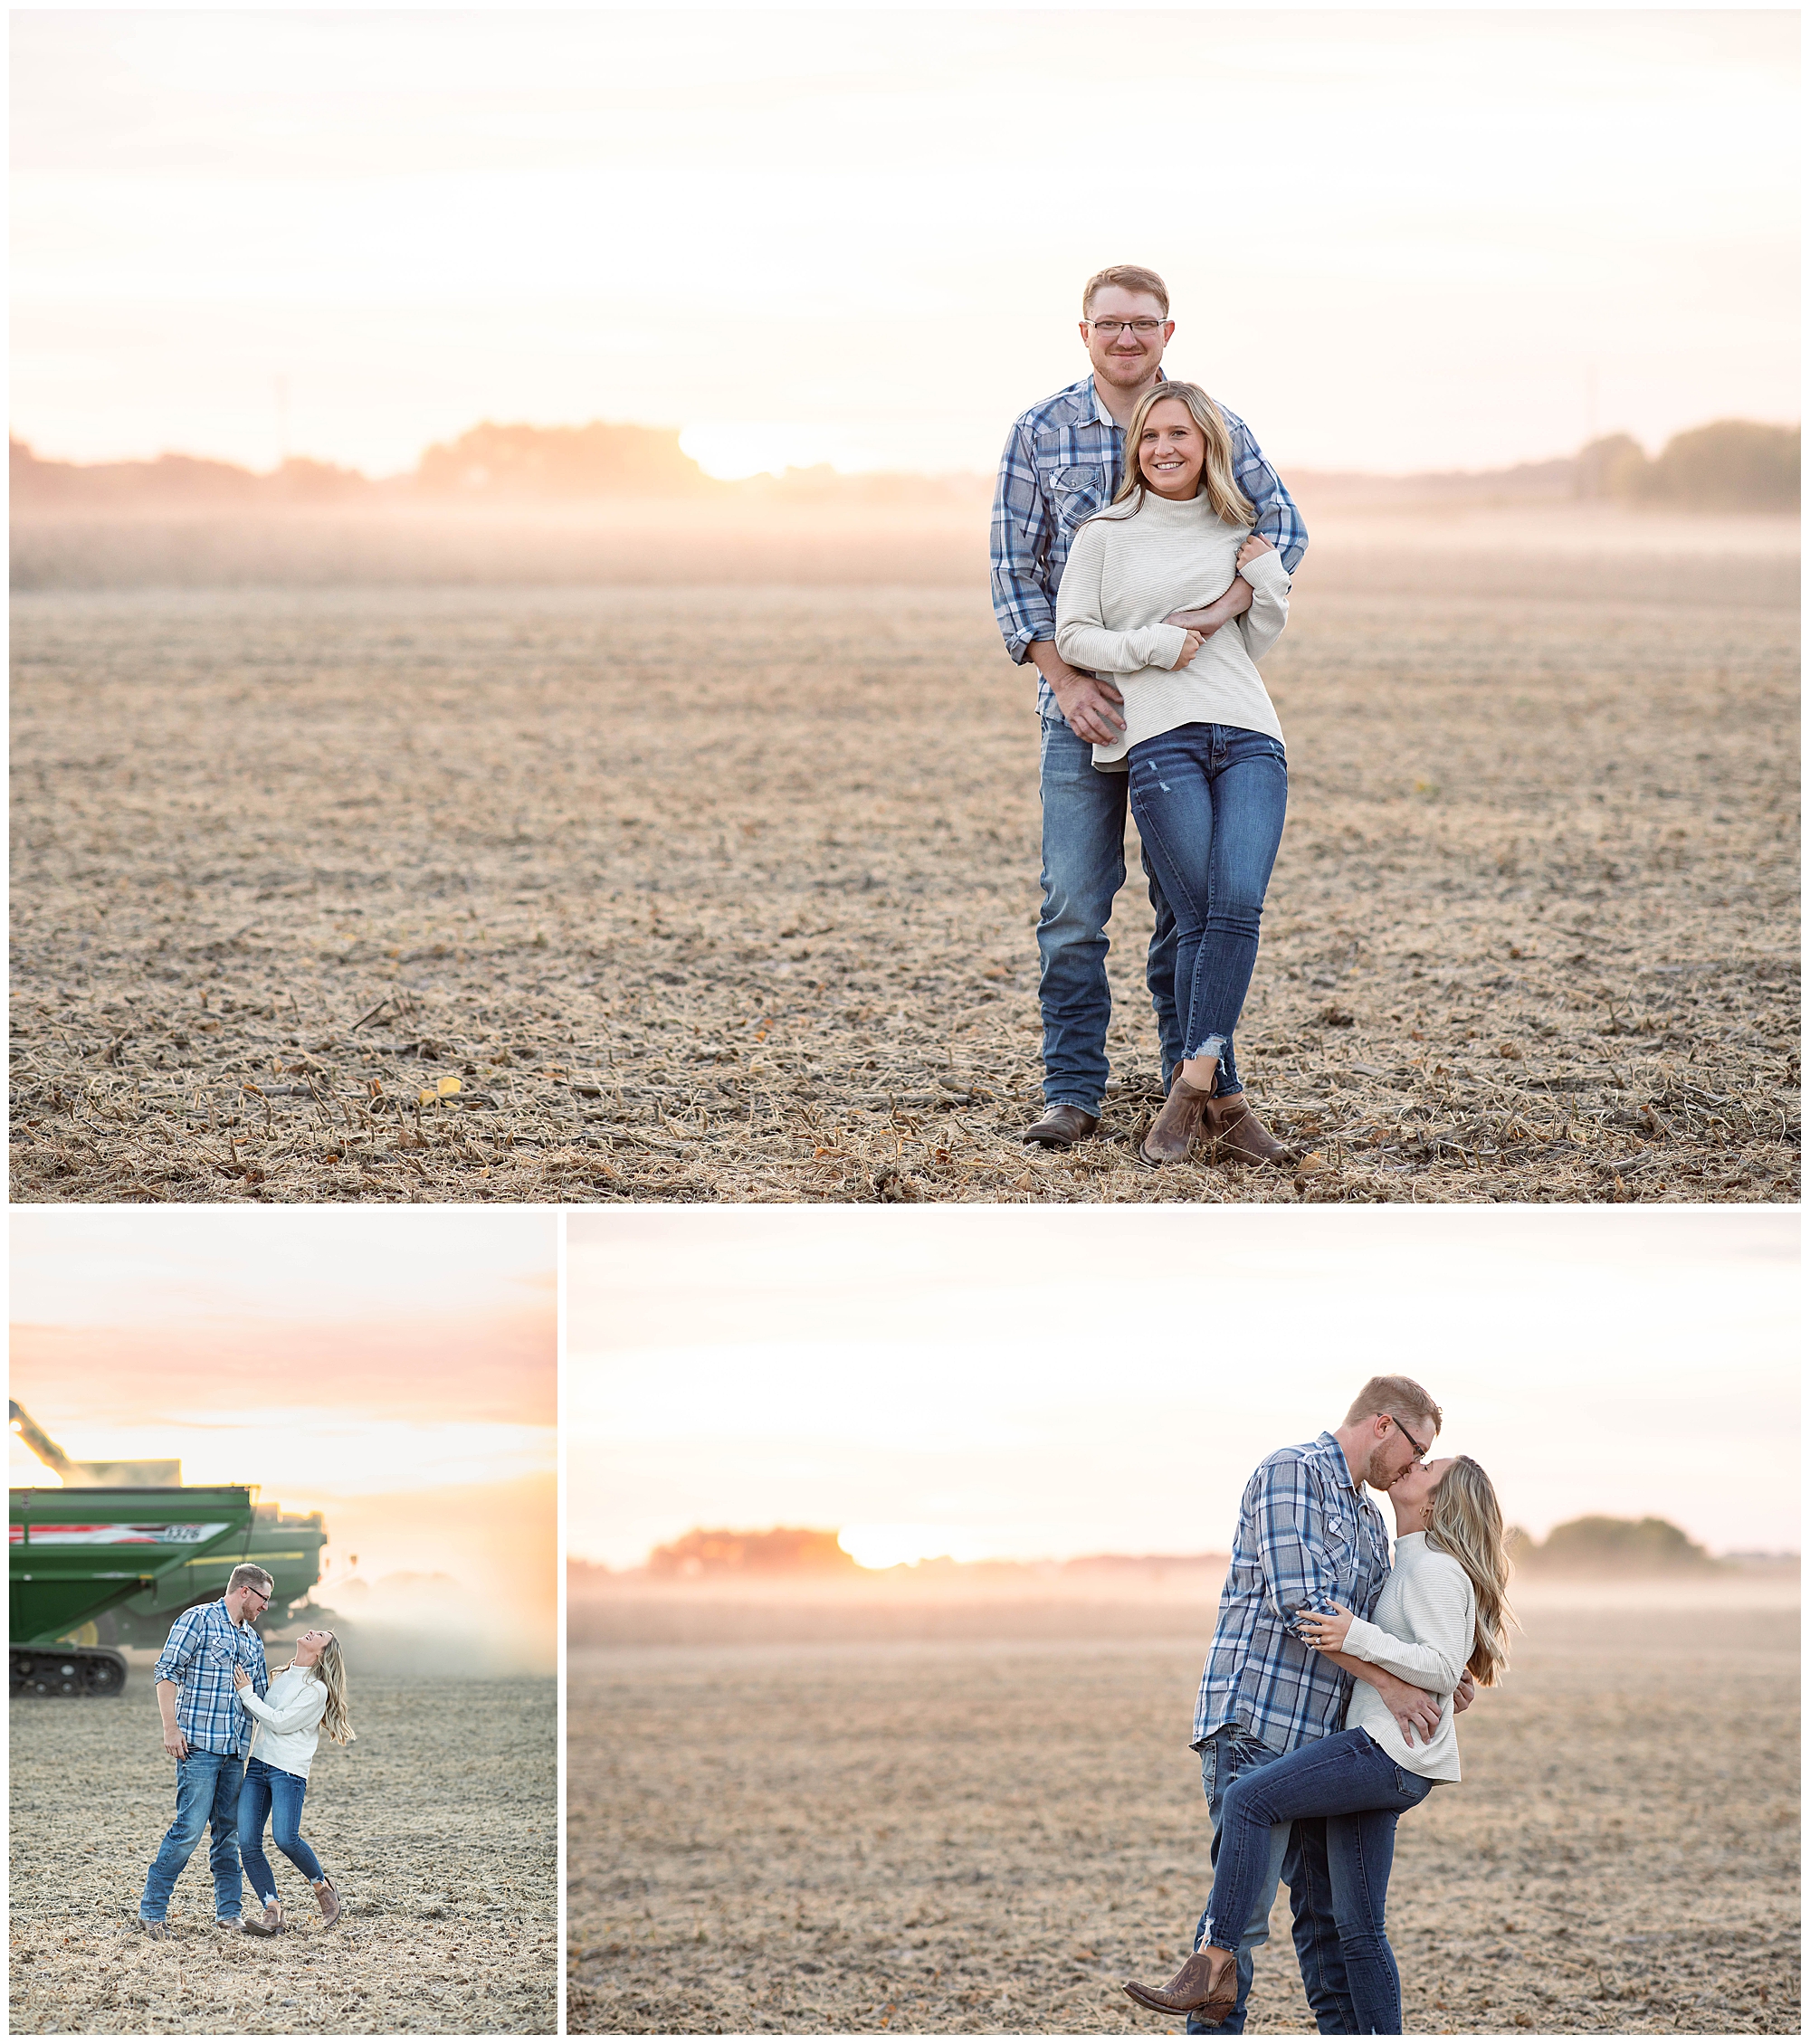 Farm Field Engagement Session at Dusk 